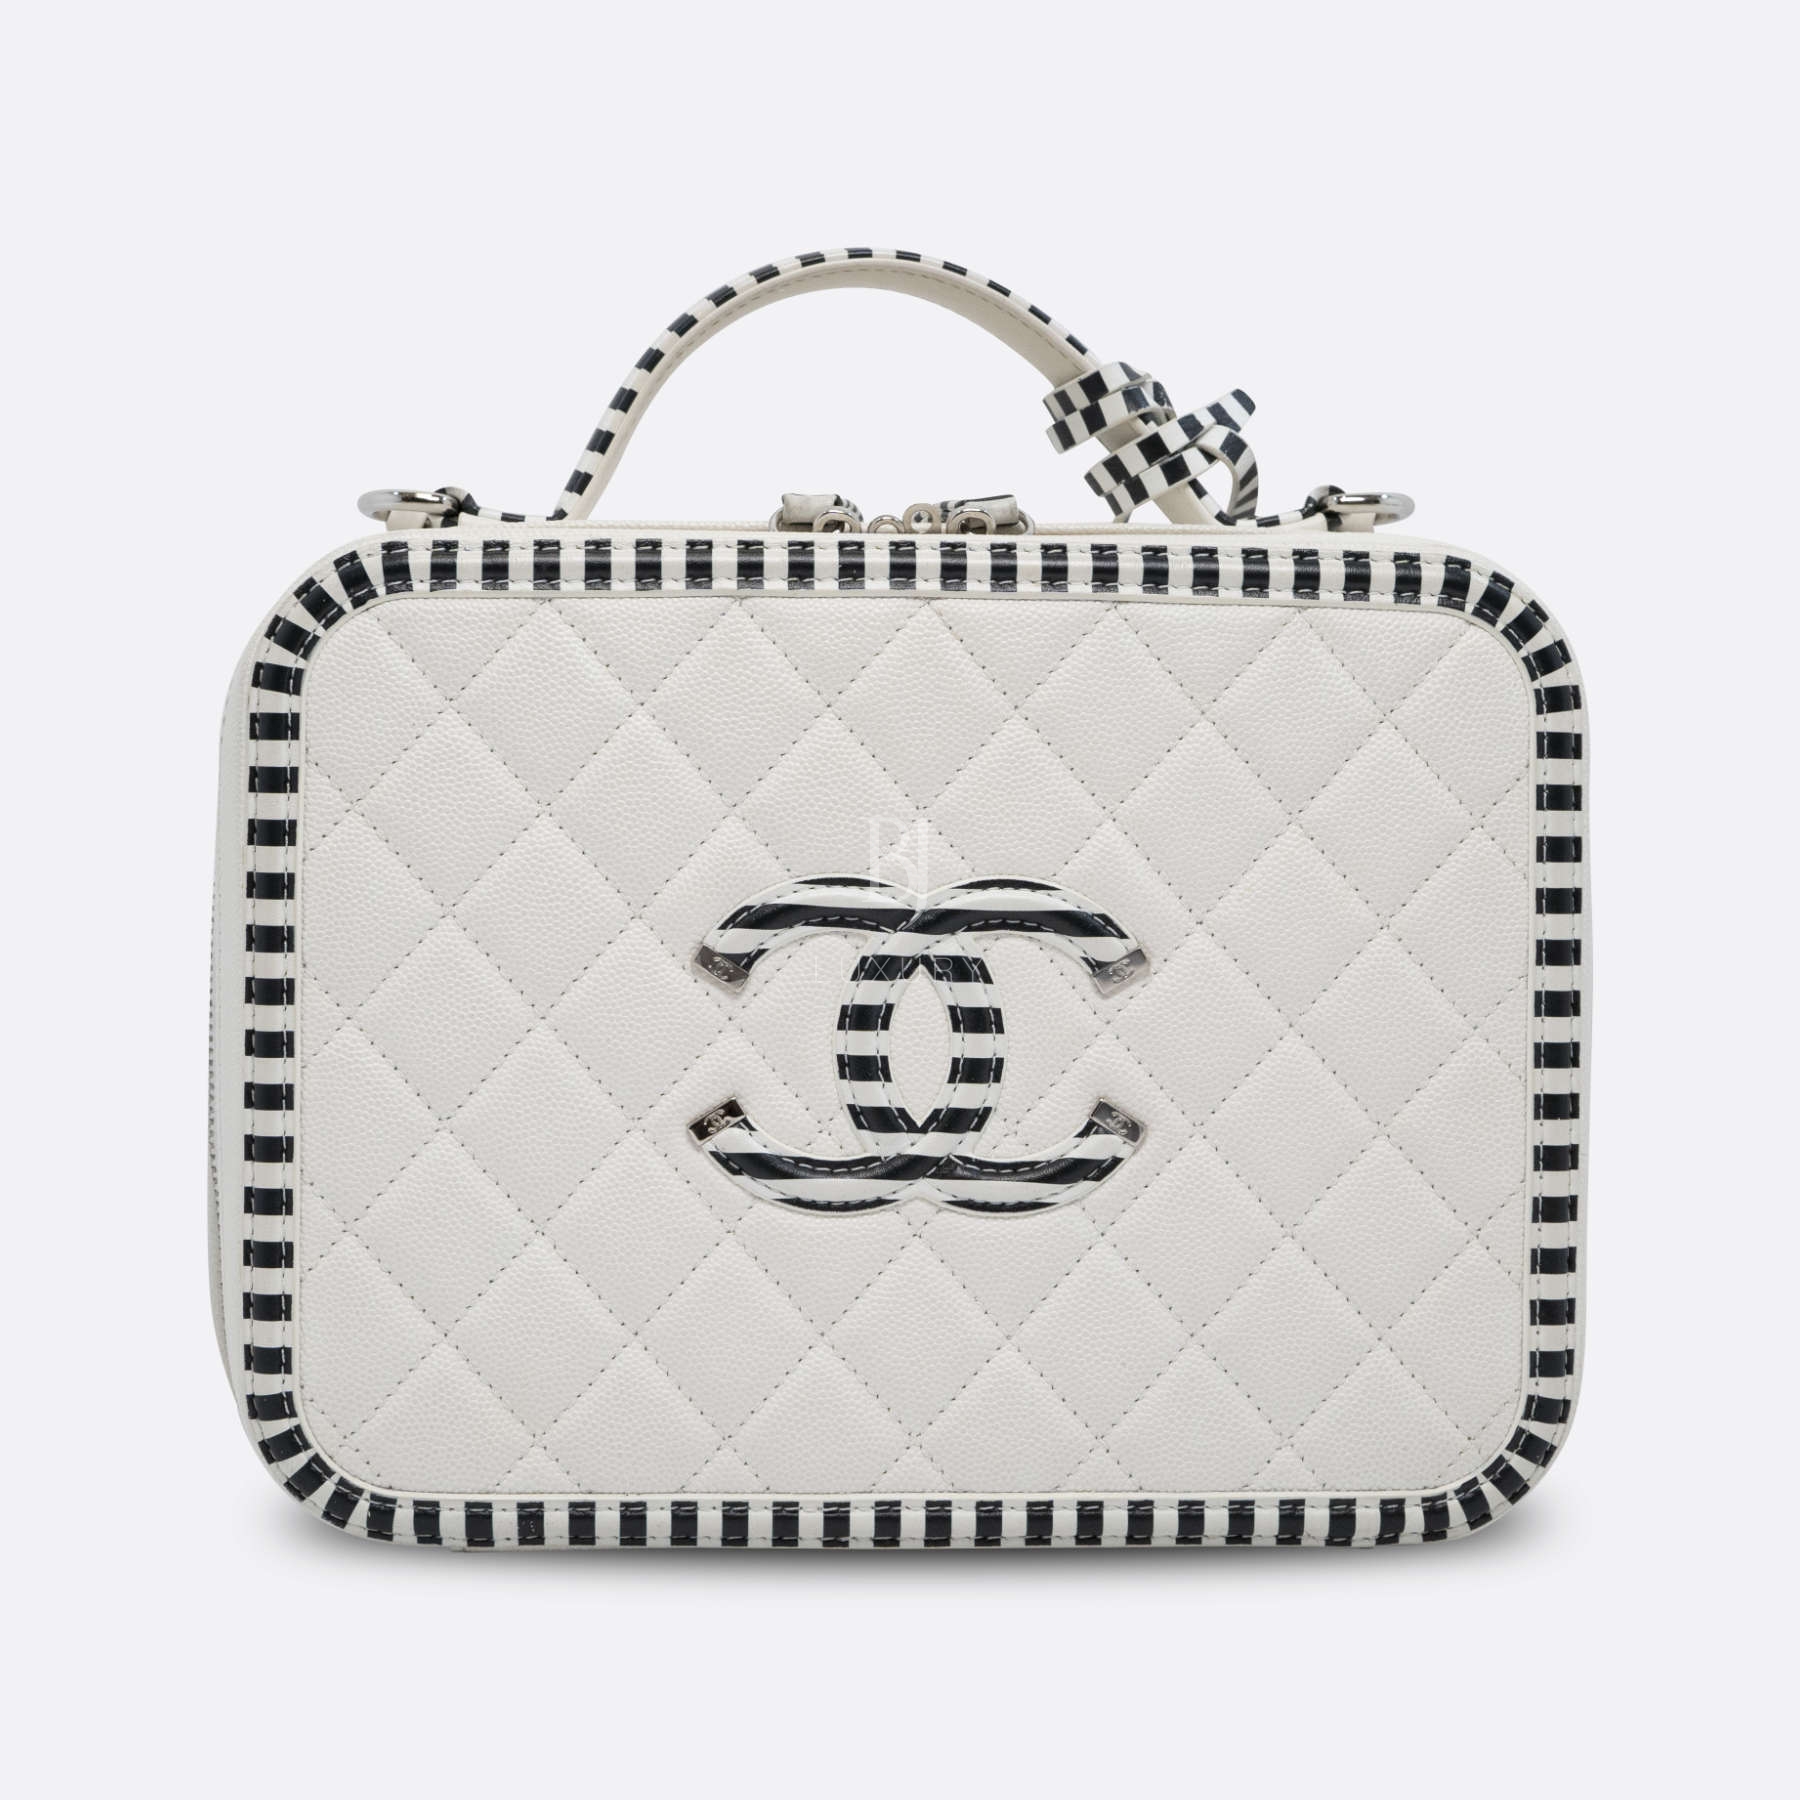 CHANEL-VANITY-LARGE-WHITE-CAVIAR-4569 front.jpg